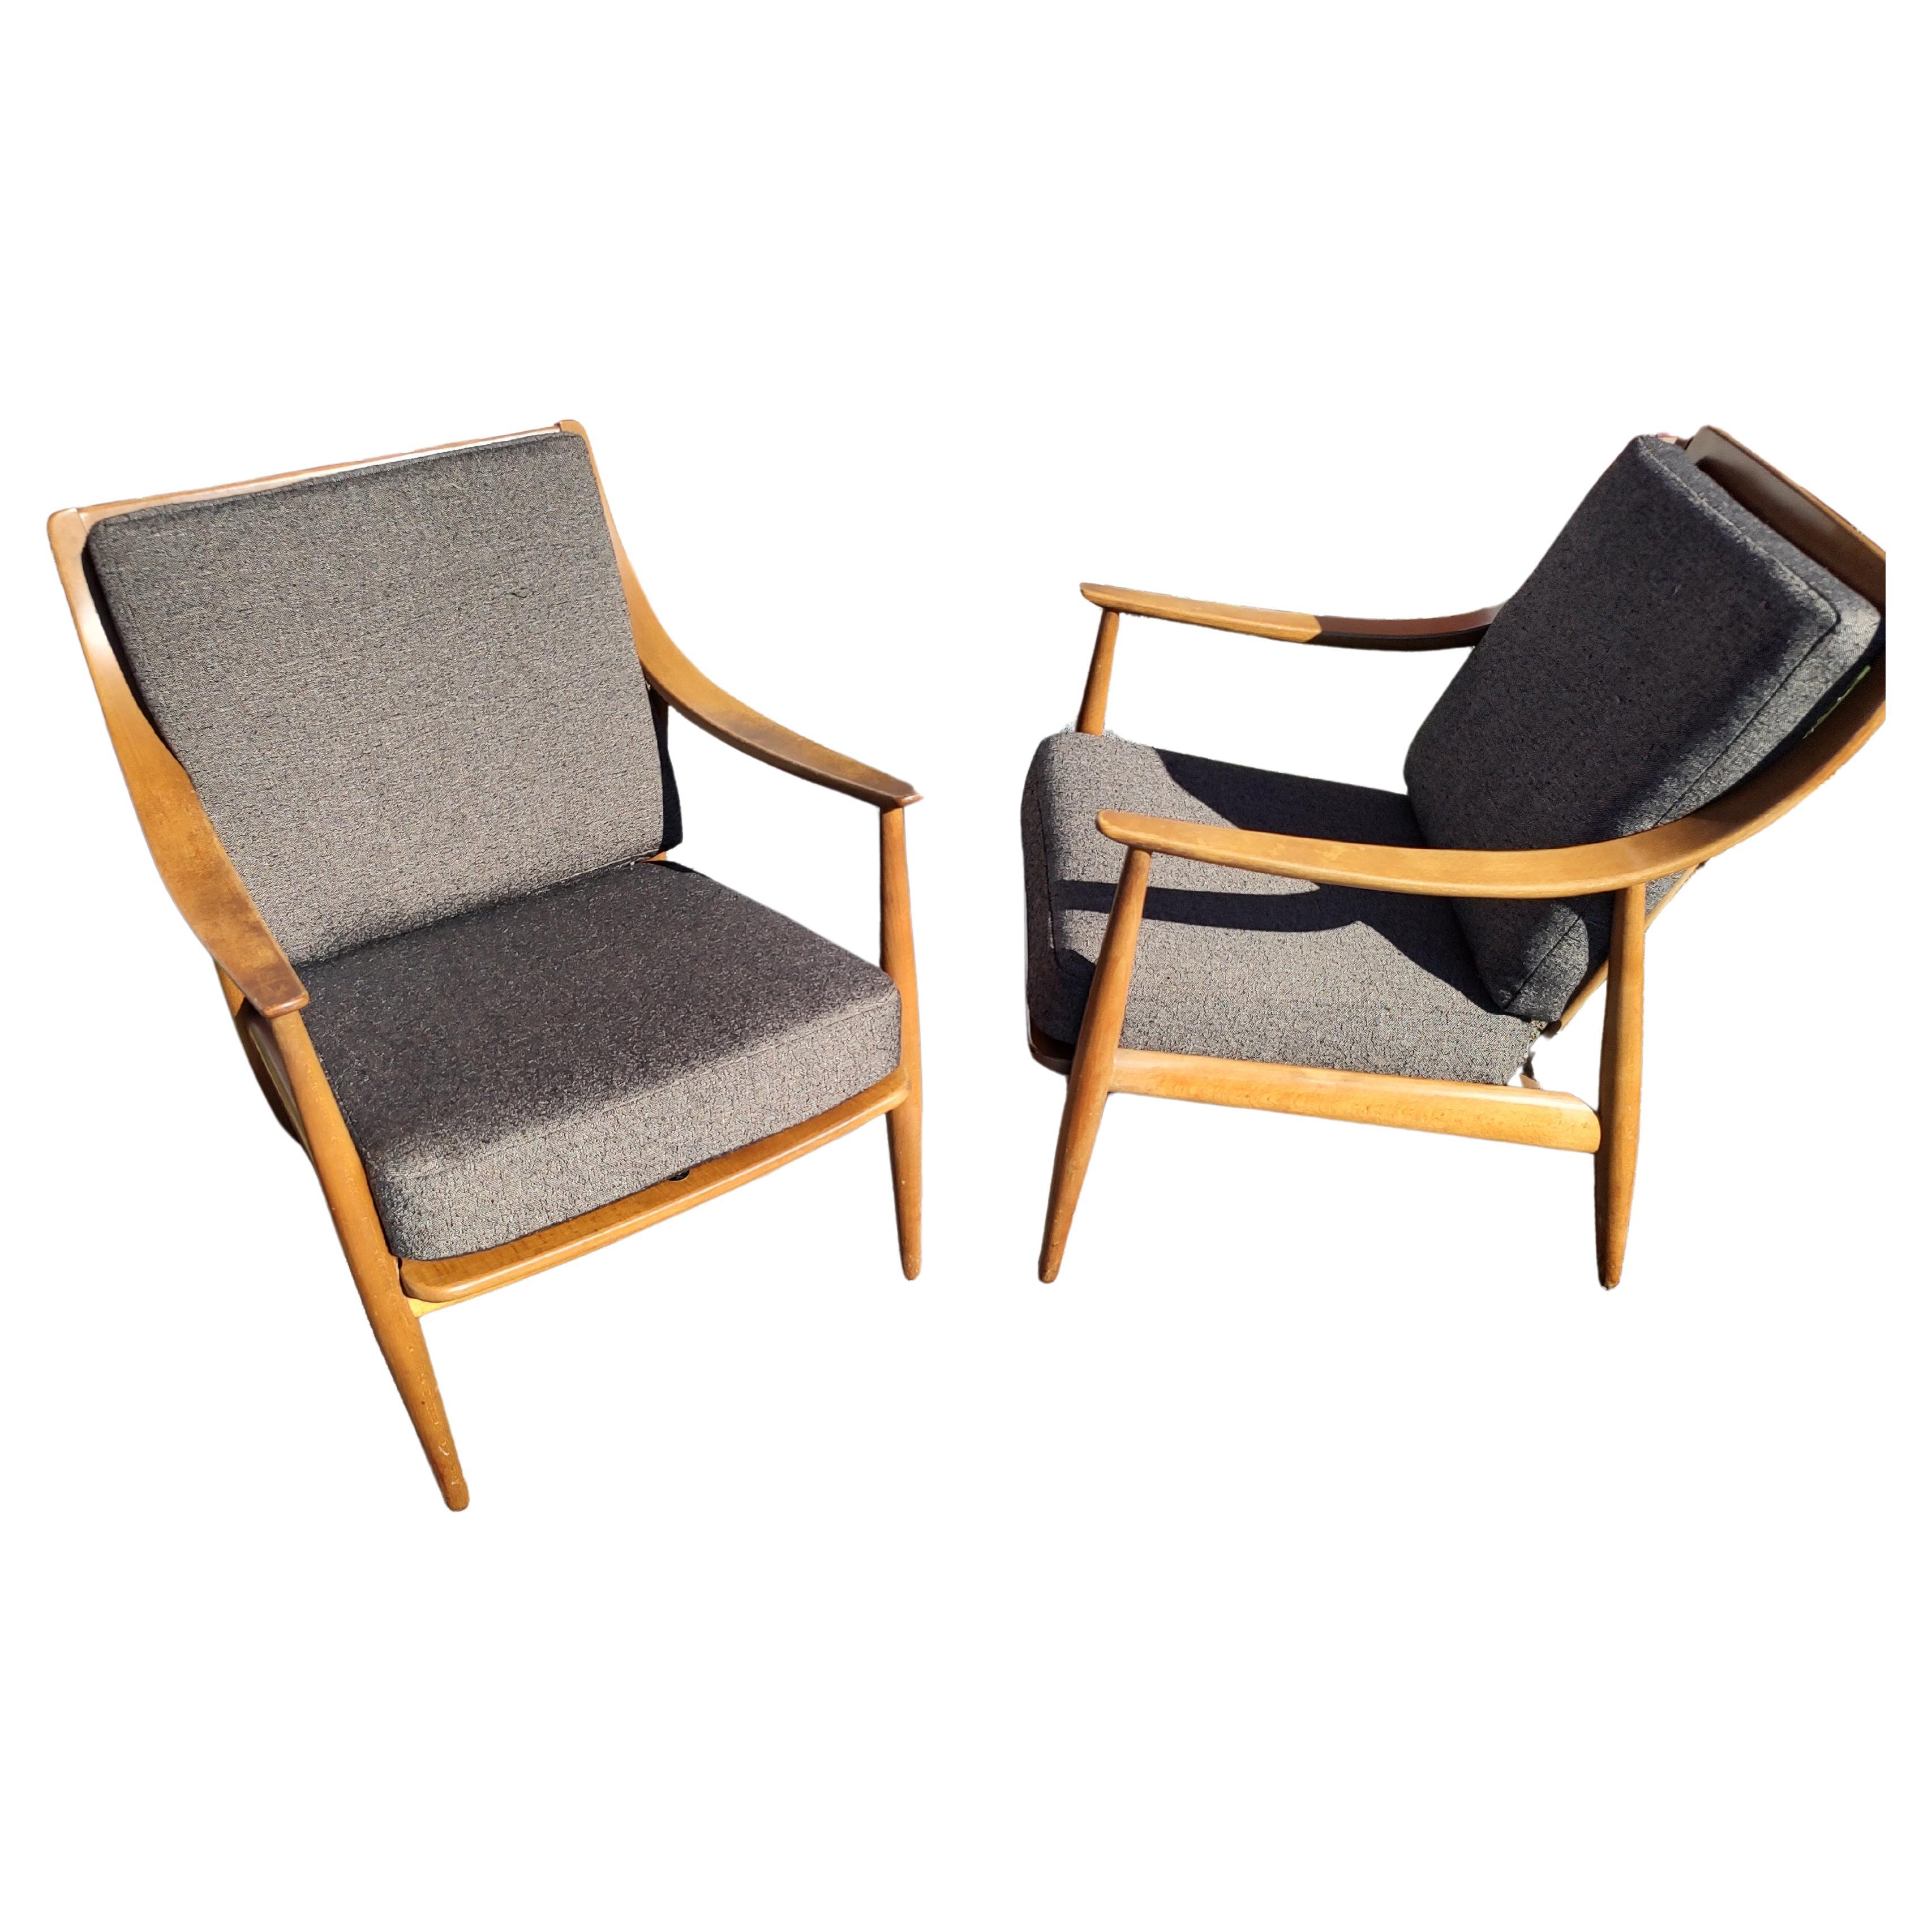 Fabric Pair of Mid-Century Modern Lounge Chairs by Peter Hvidt & Olga Molgaard Neilson  For Sale